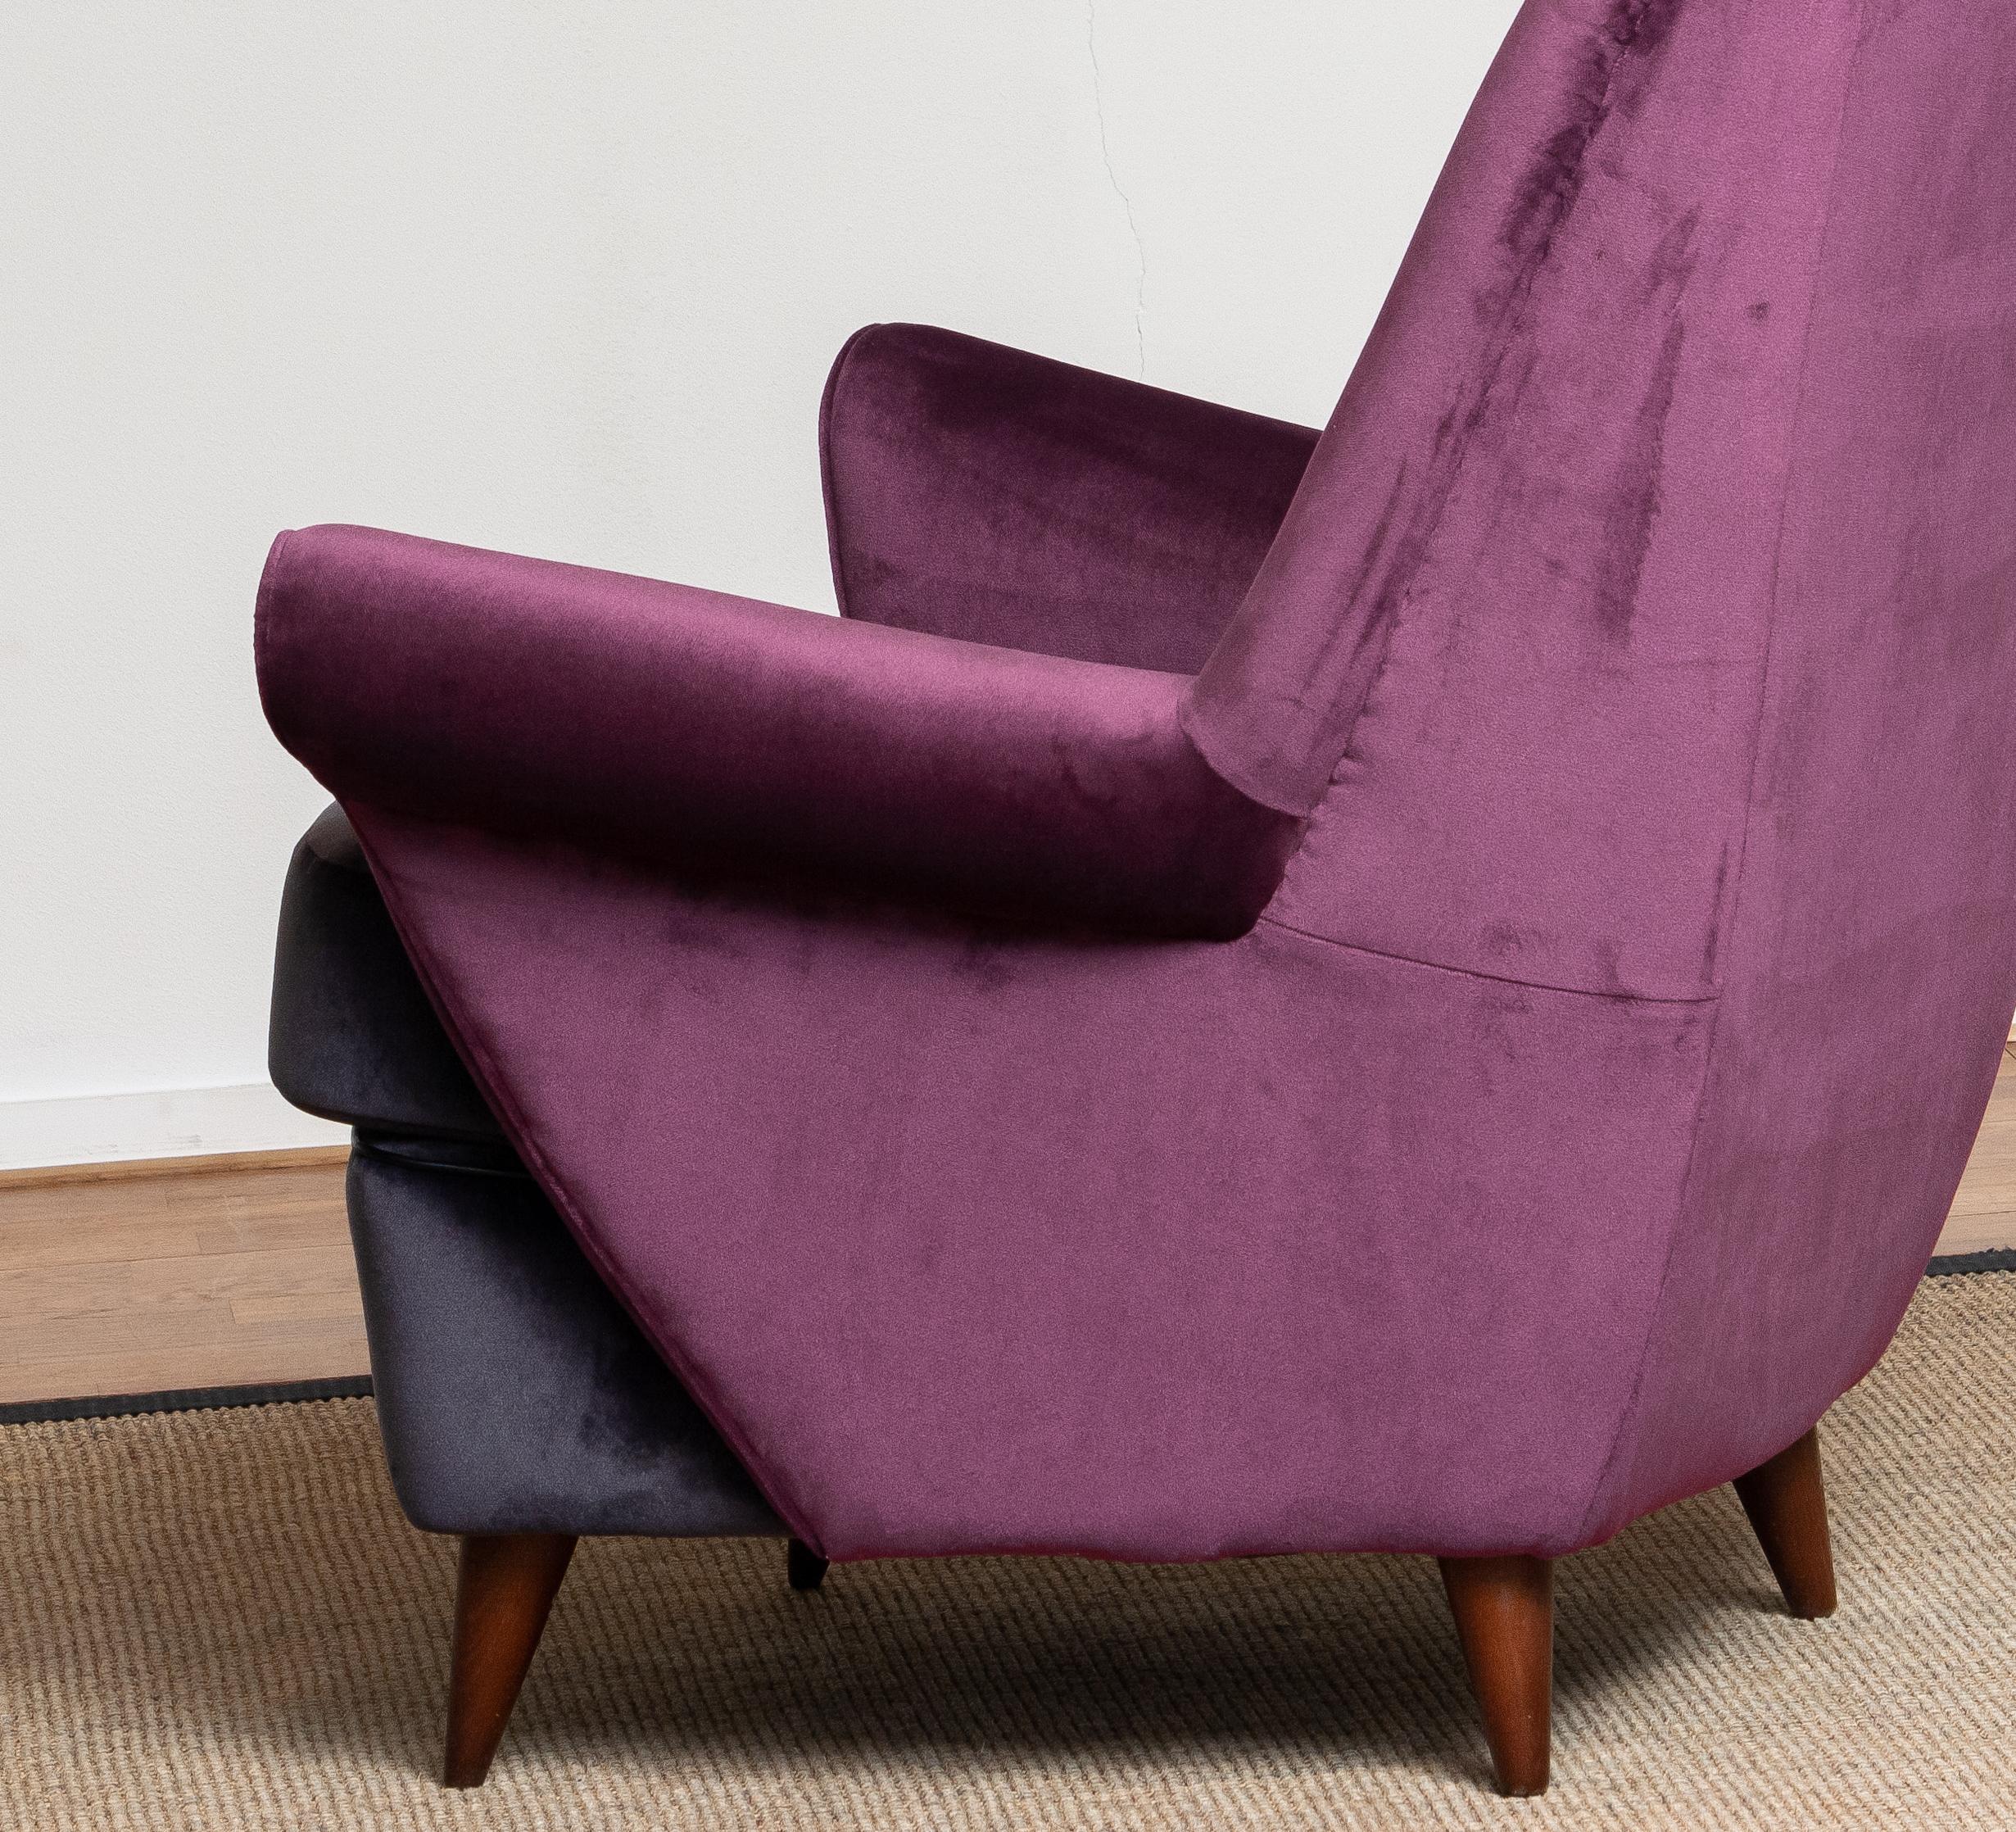 1950 Lounge / Easy Chair in Magenta by Designed Gio Ponti for ISA Bergamo, Italy 1